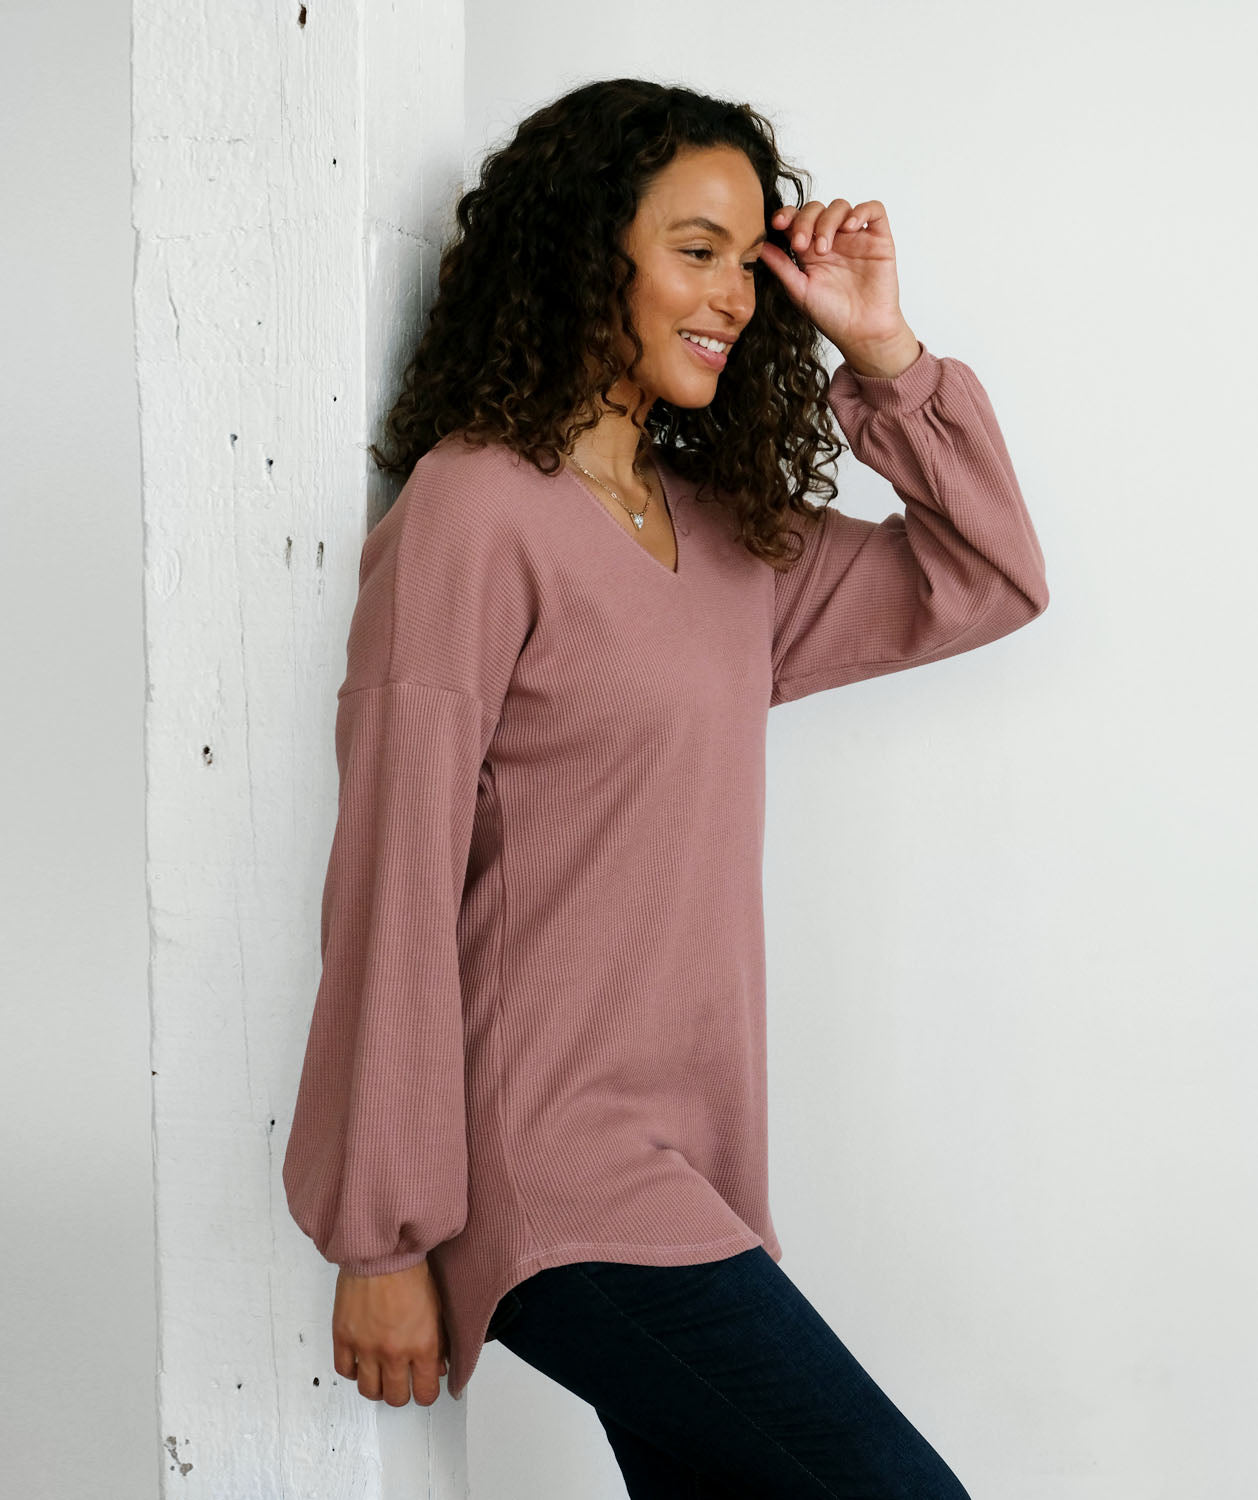 CLAUDE waffle knit tunic in Desert Pink